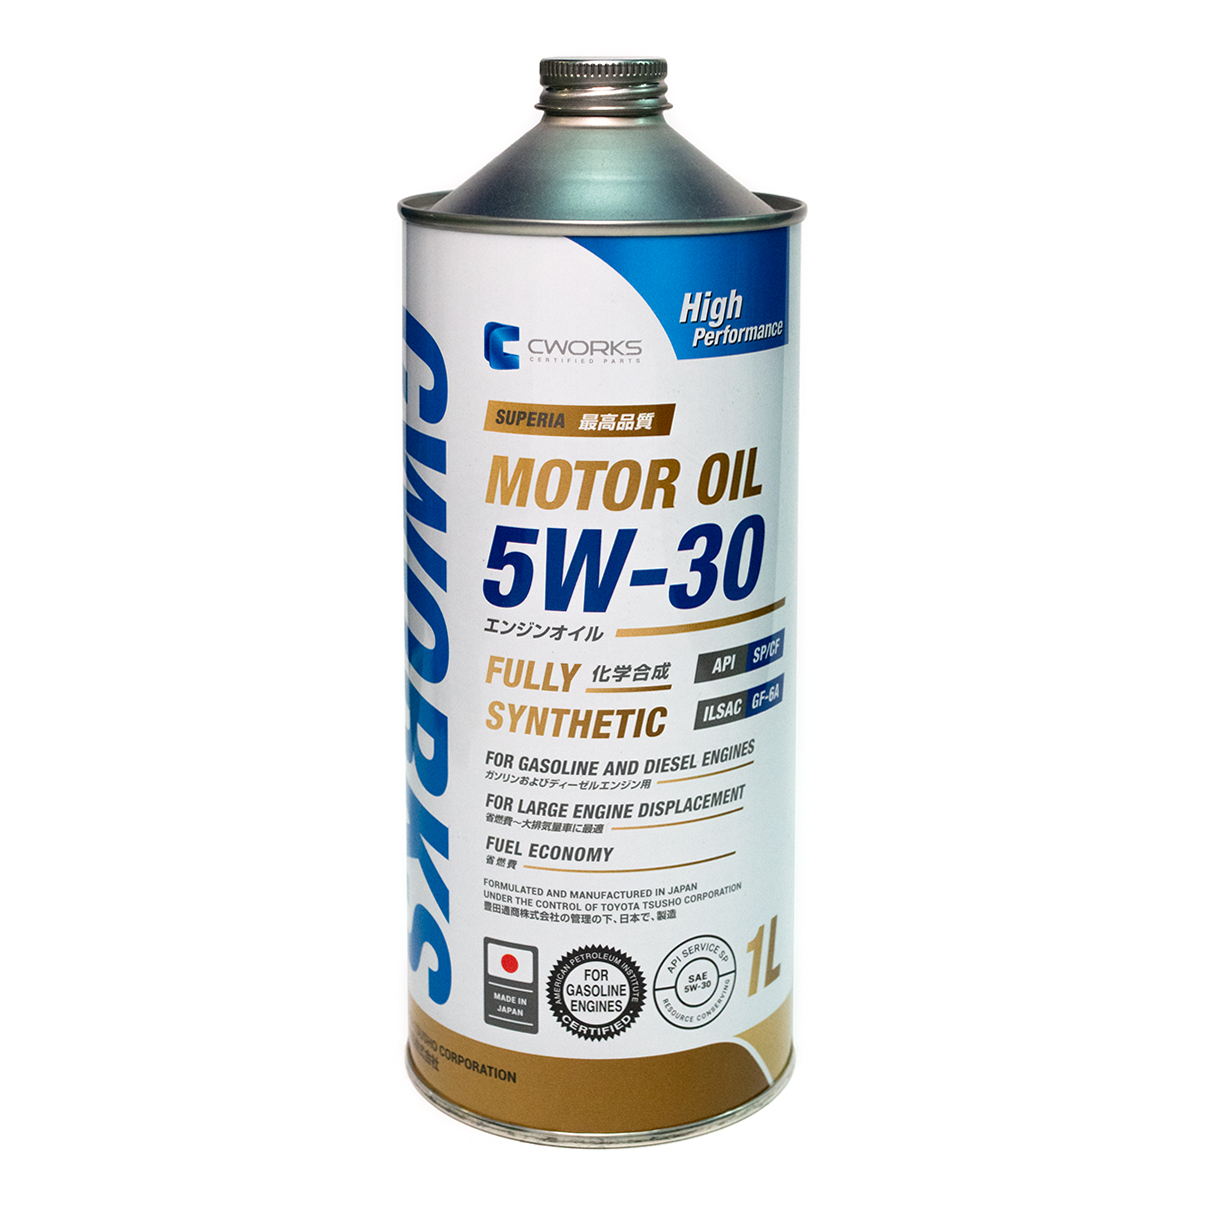 Superia motor OIL 5w-30 sp/cf, 1L Масло моторное - CWORKS A13SR1001